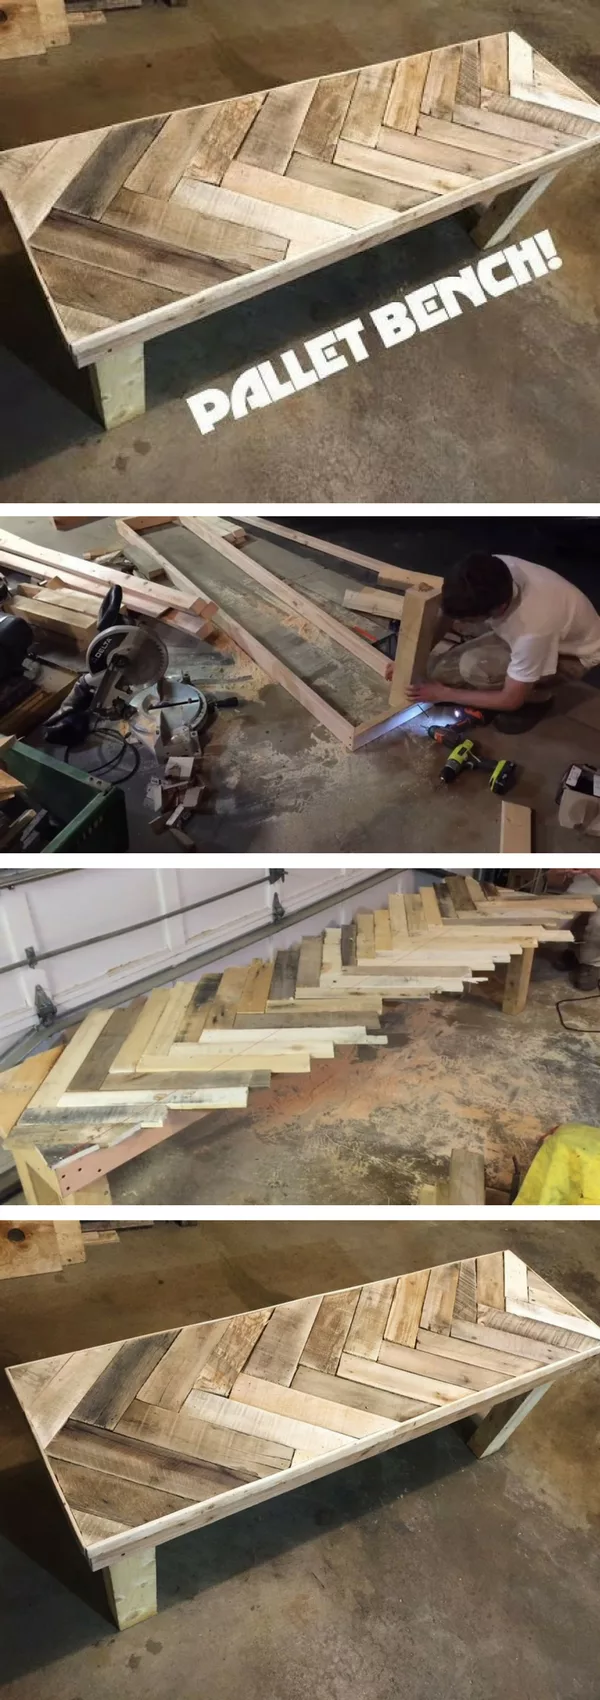 Check out the tutorial on how to make a DIY pallet bench